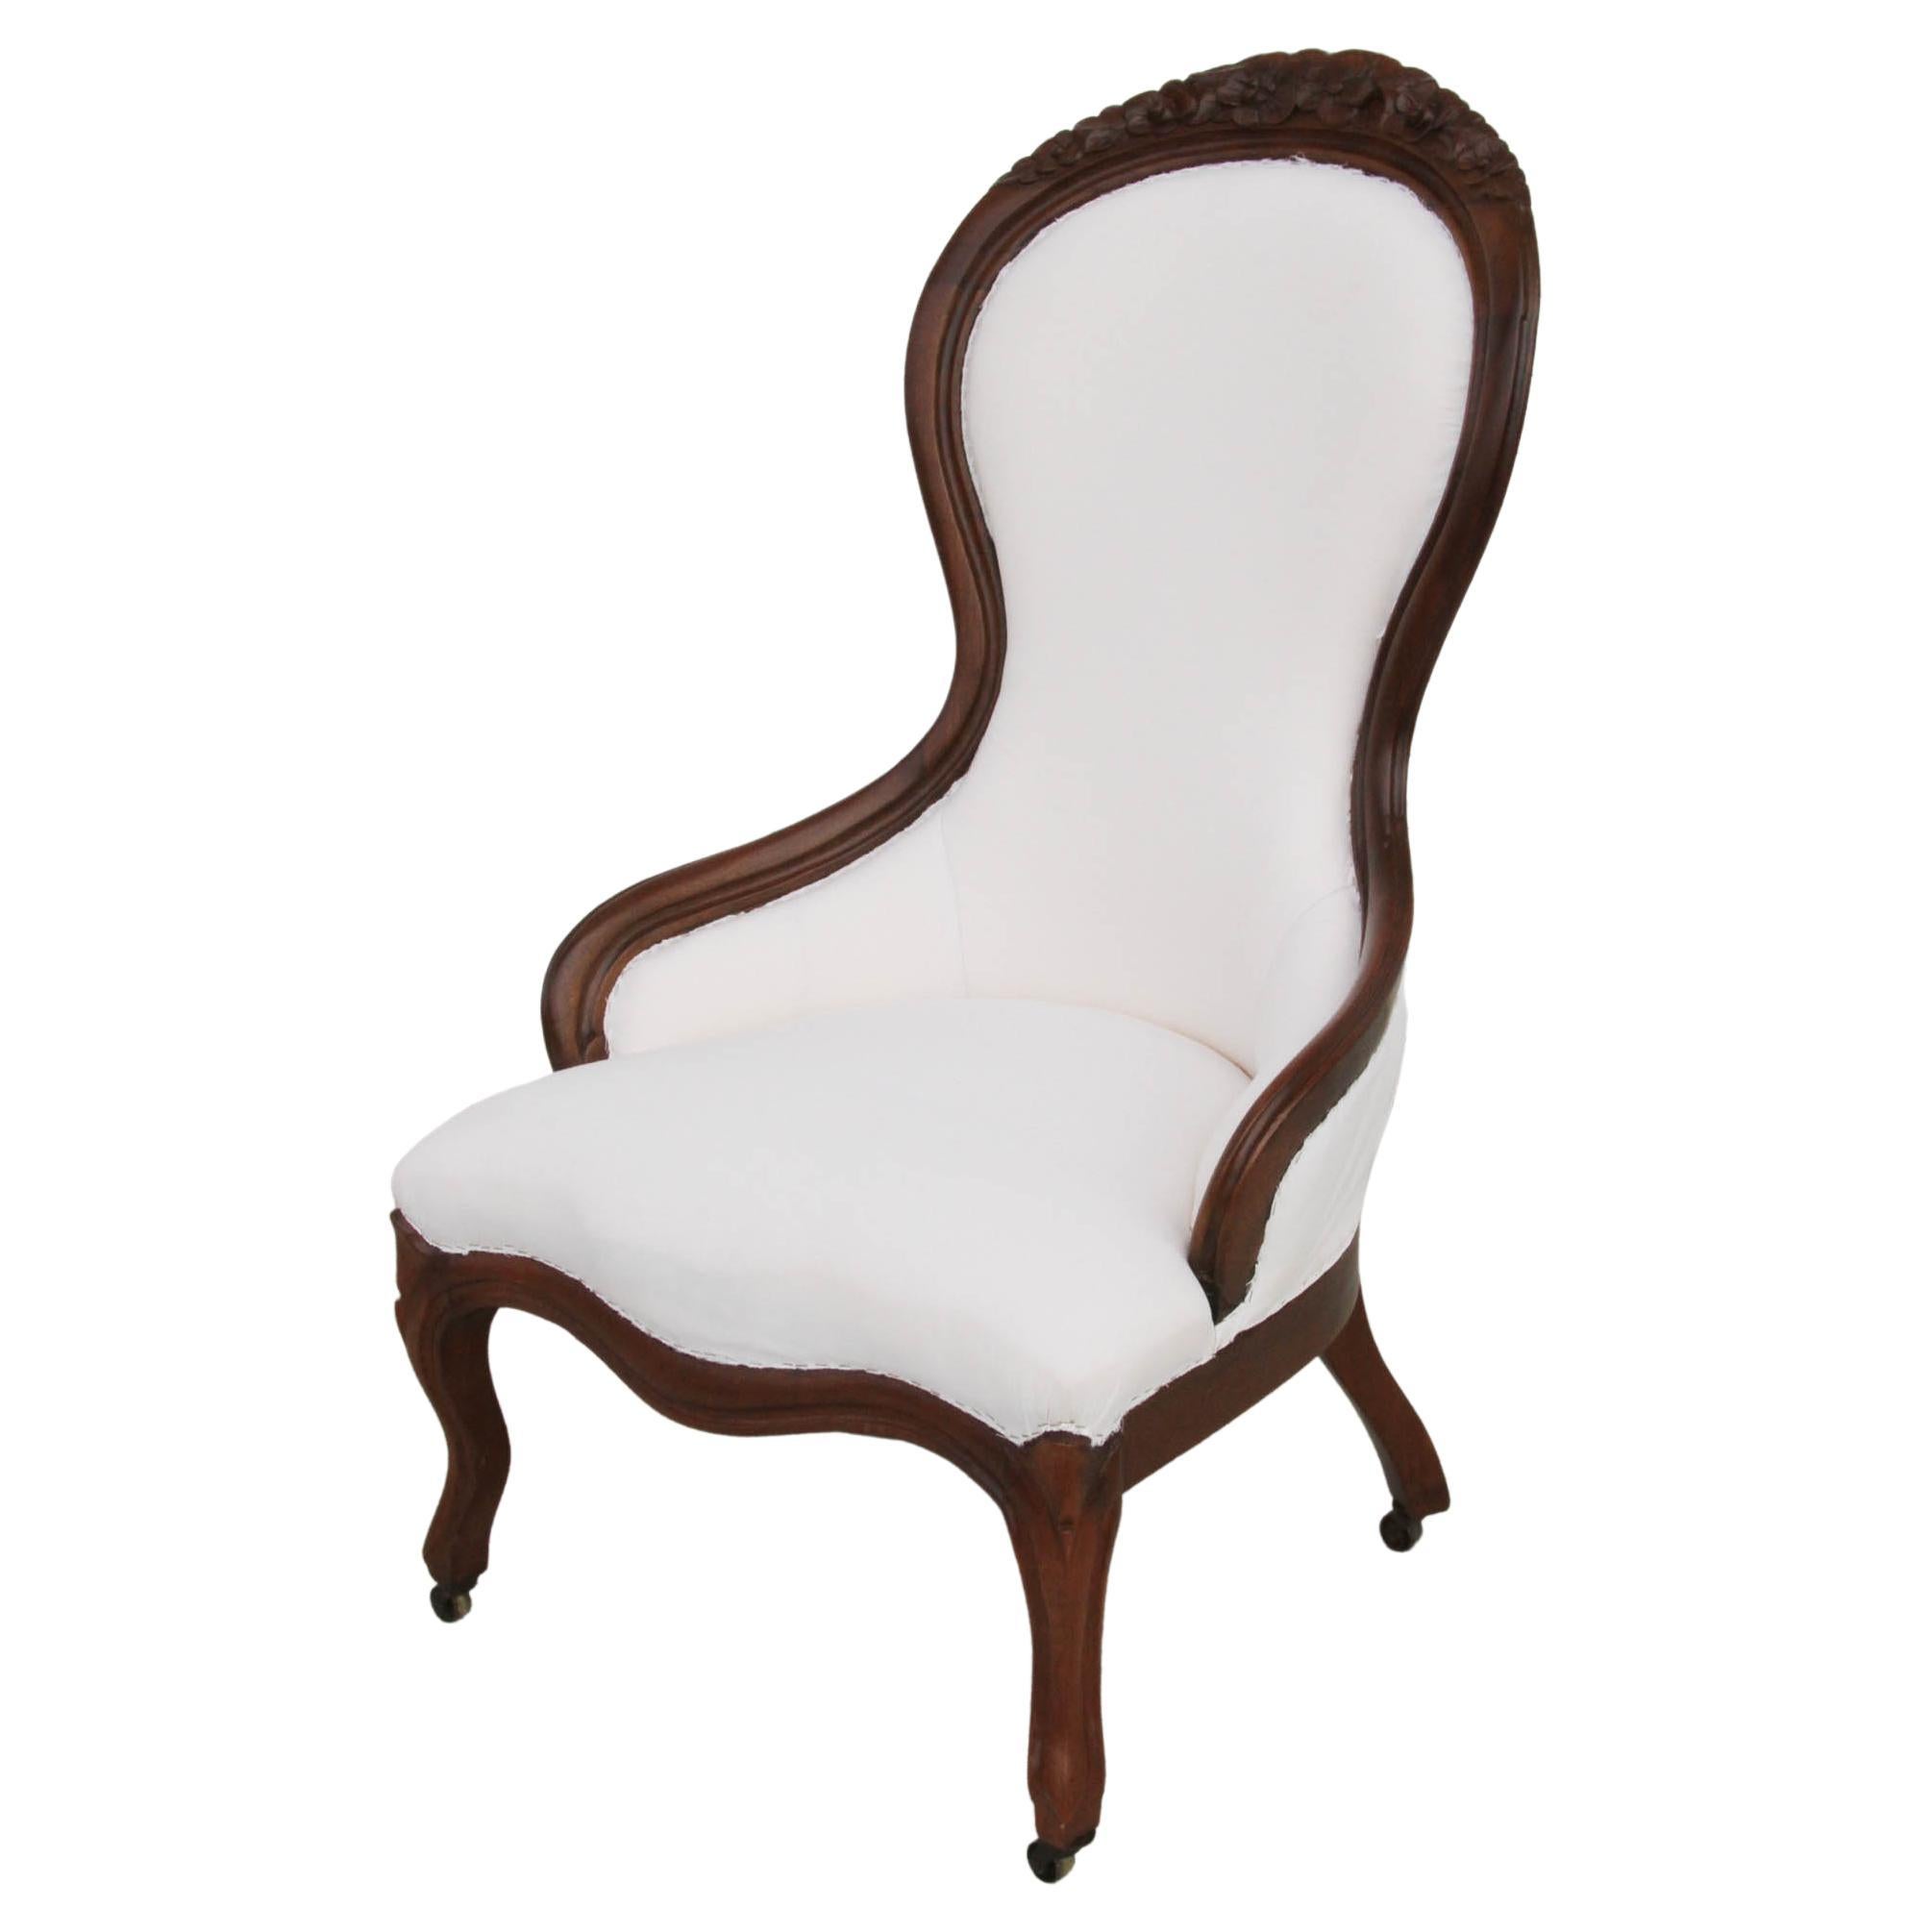 Victorian Style Spoon Back Parlor Lounge Chair